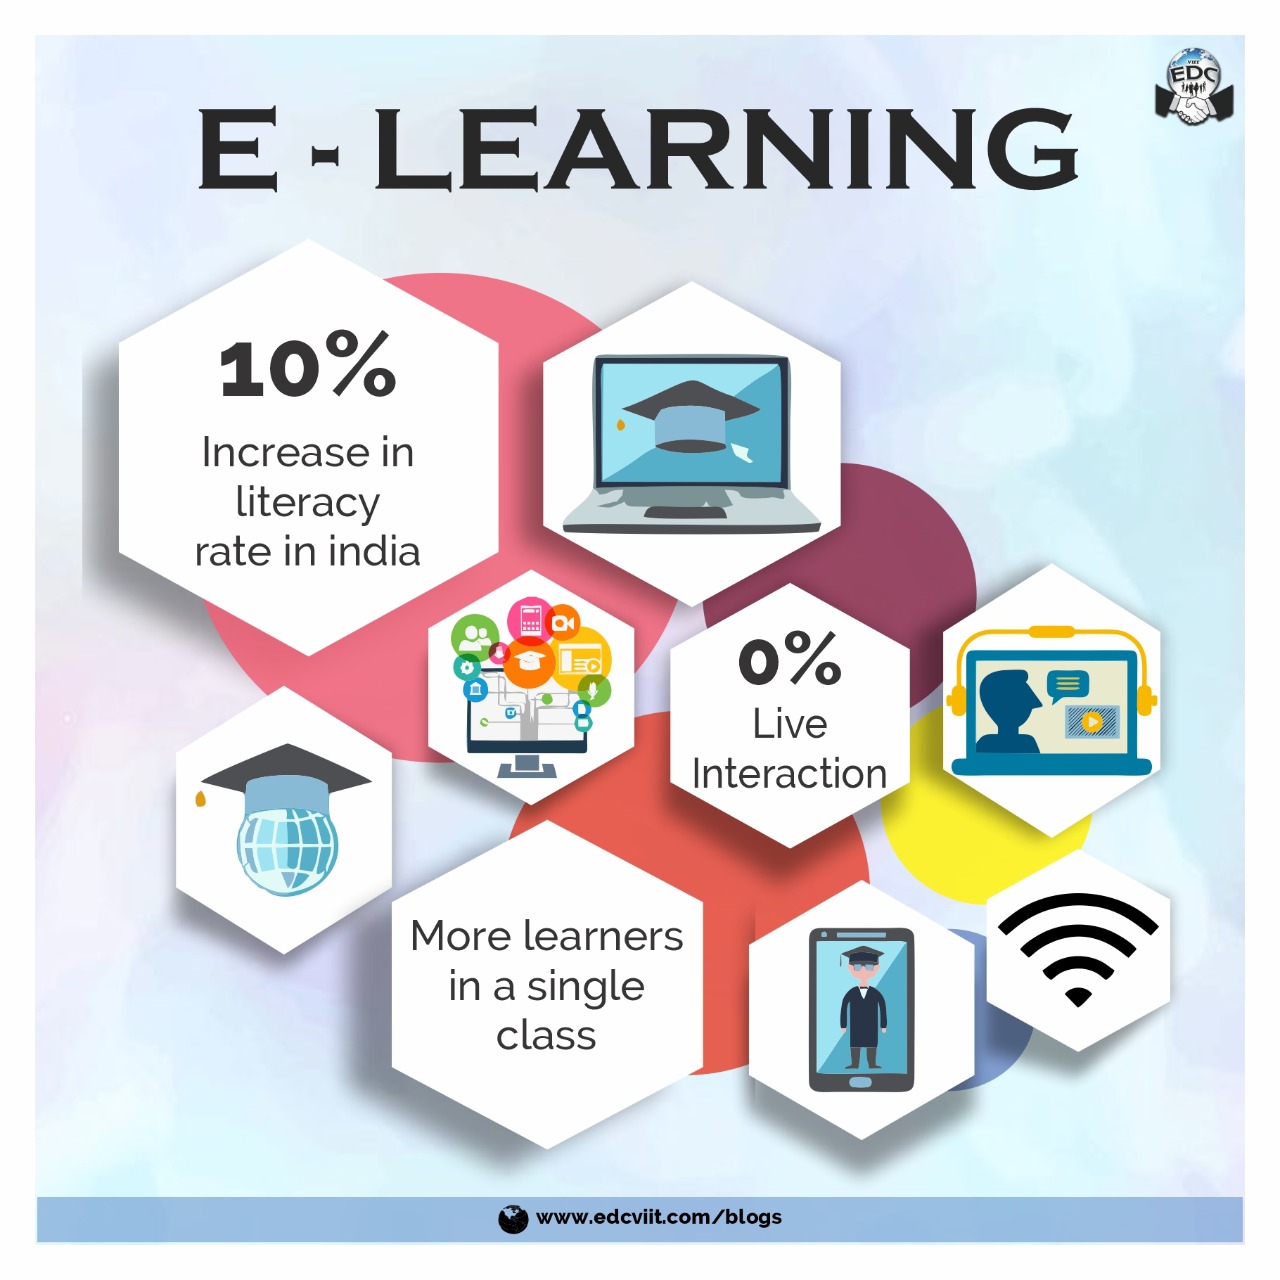 E-learning- Boon or Bane?